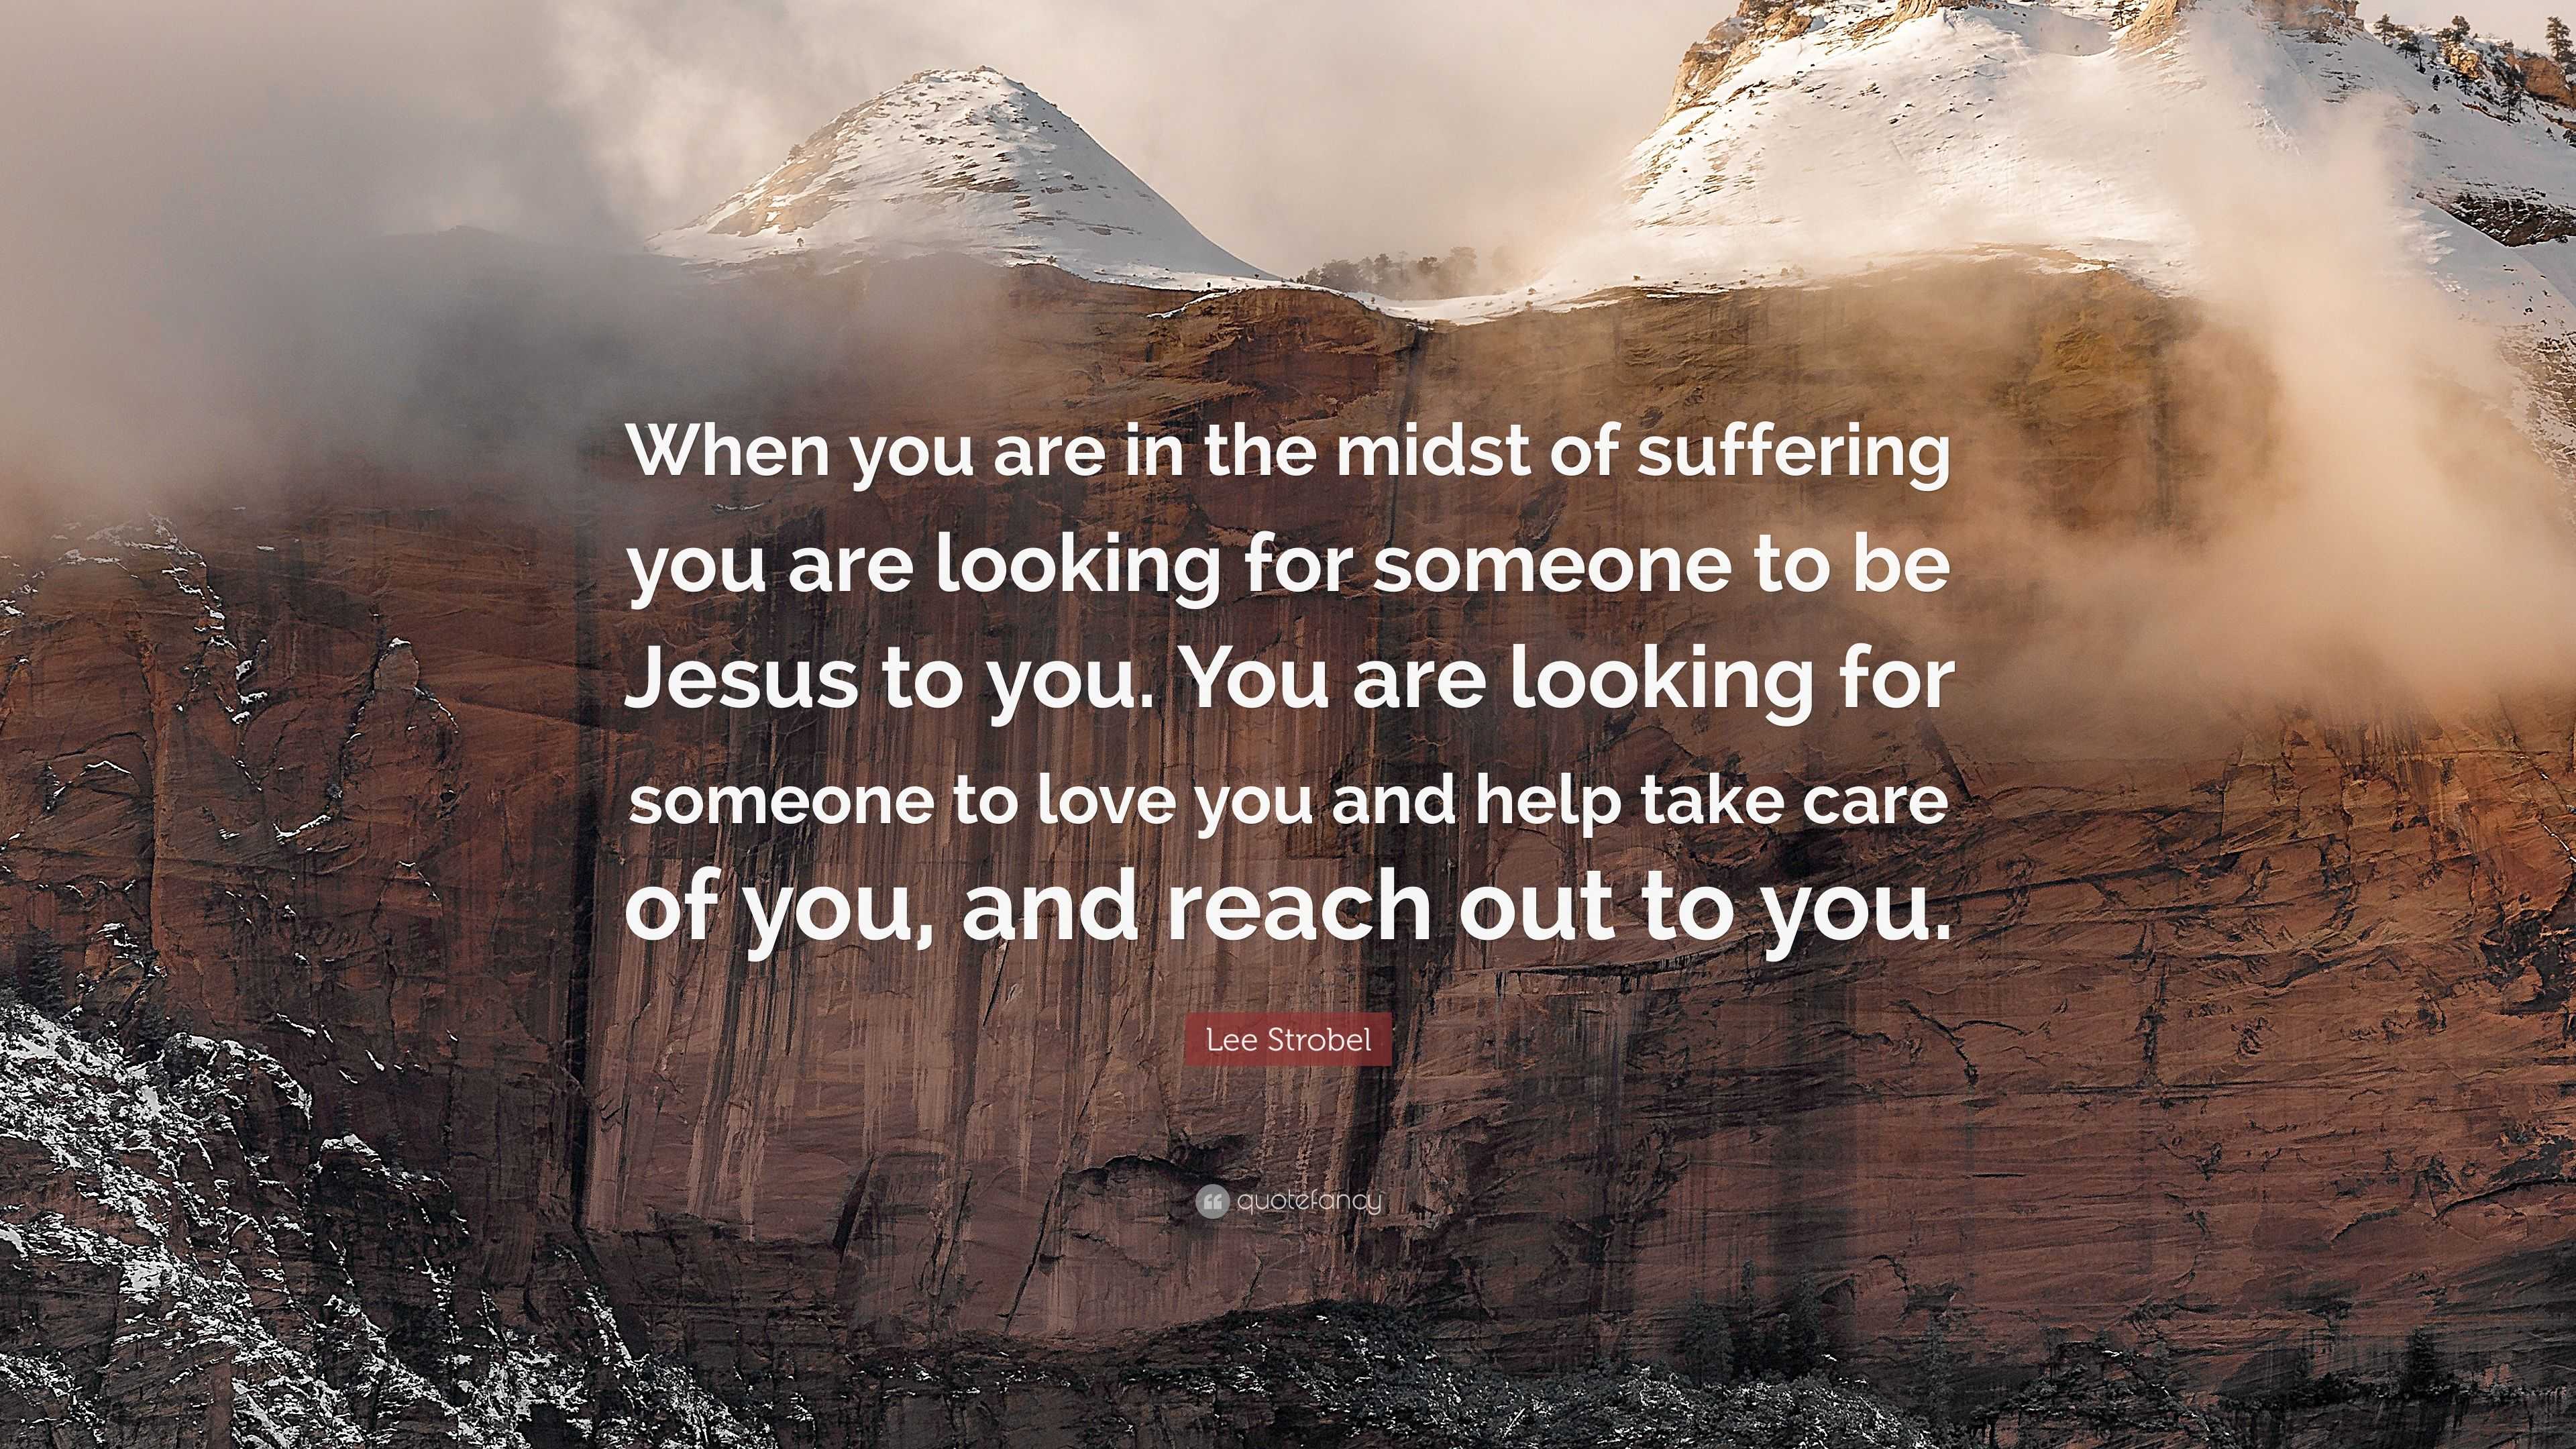 Lee Strobel Quote “When you are in the midst of suffering you are looking